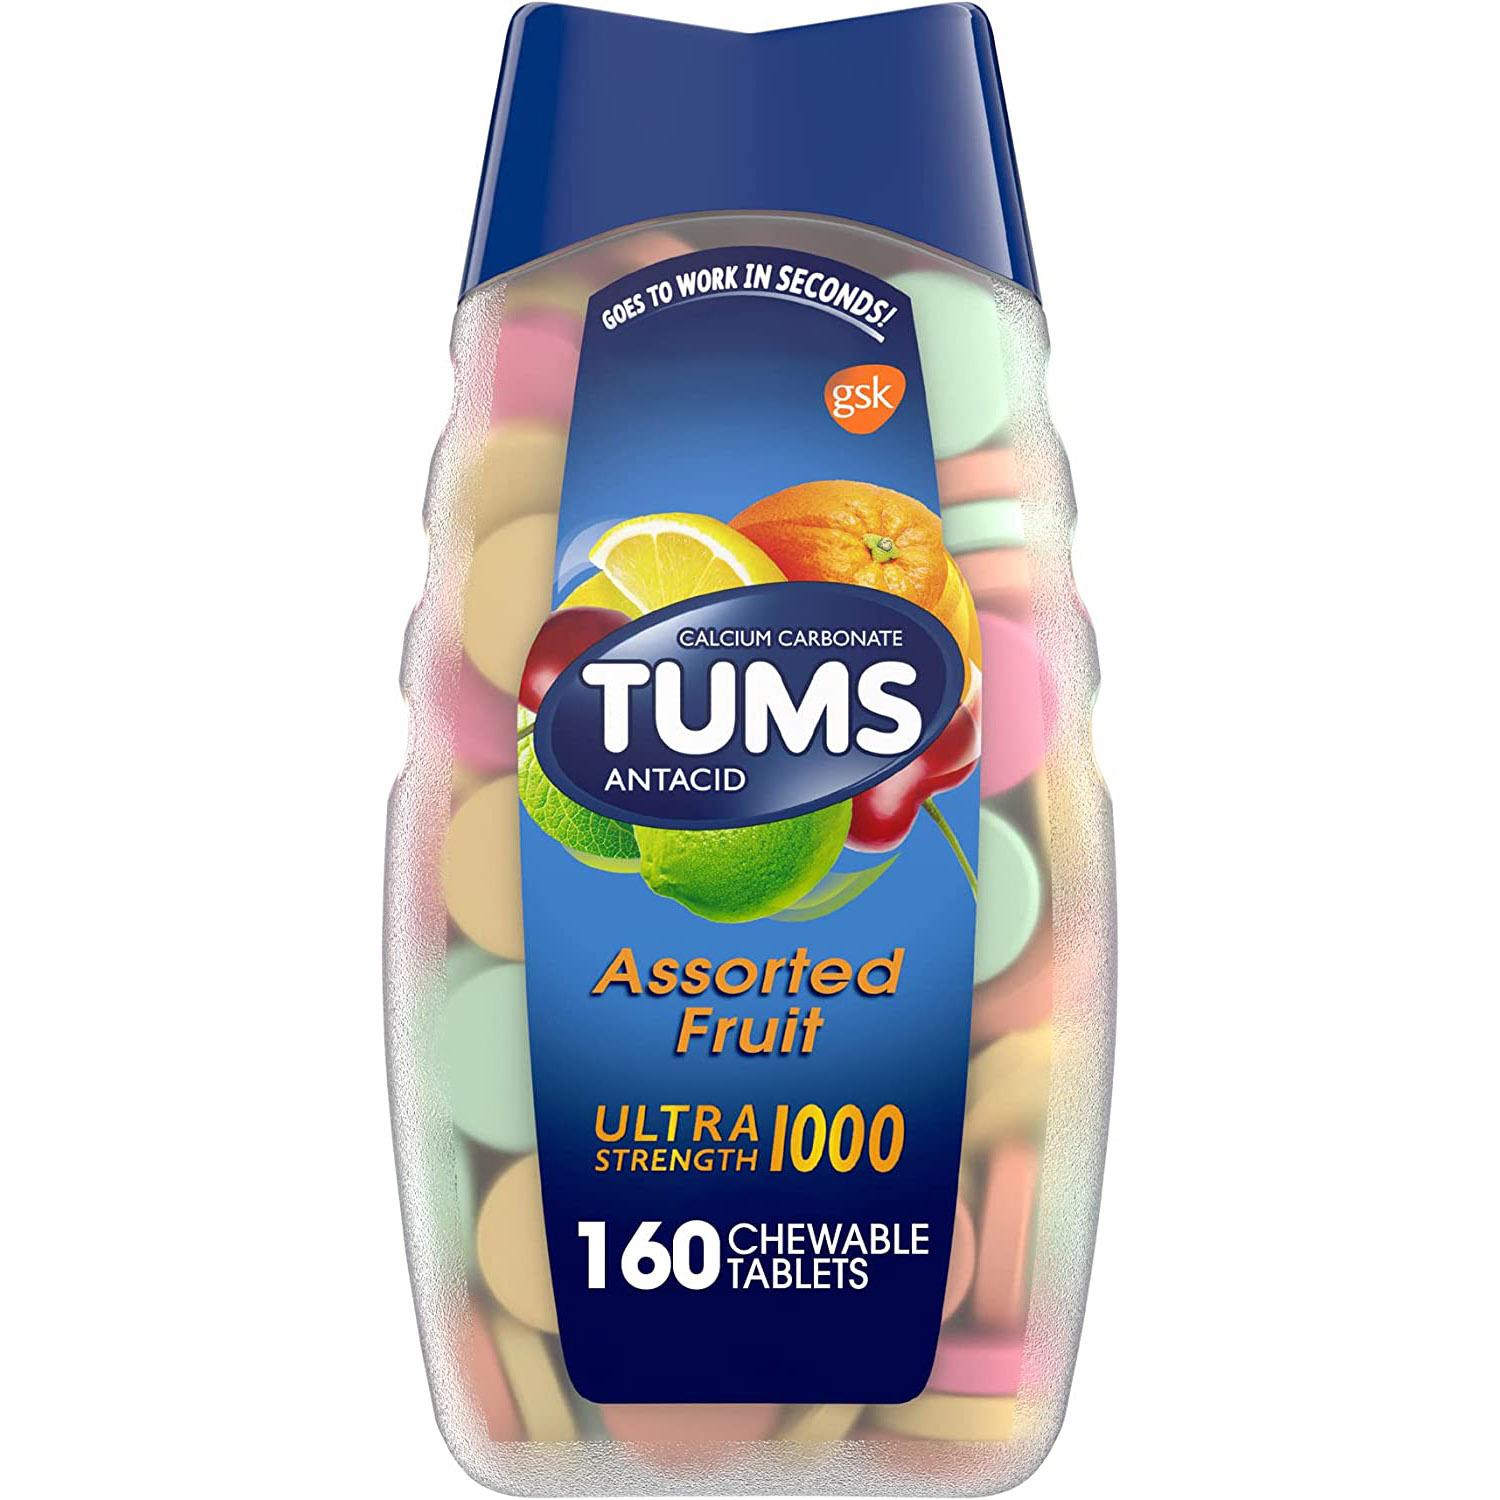 TUMS Ultra Strength Antacid Chewable Tablets for $5.59 Shipped